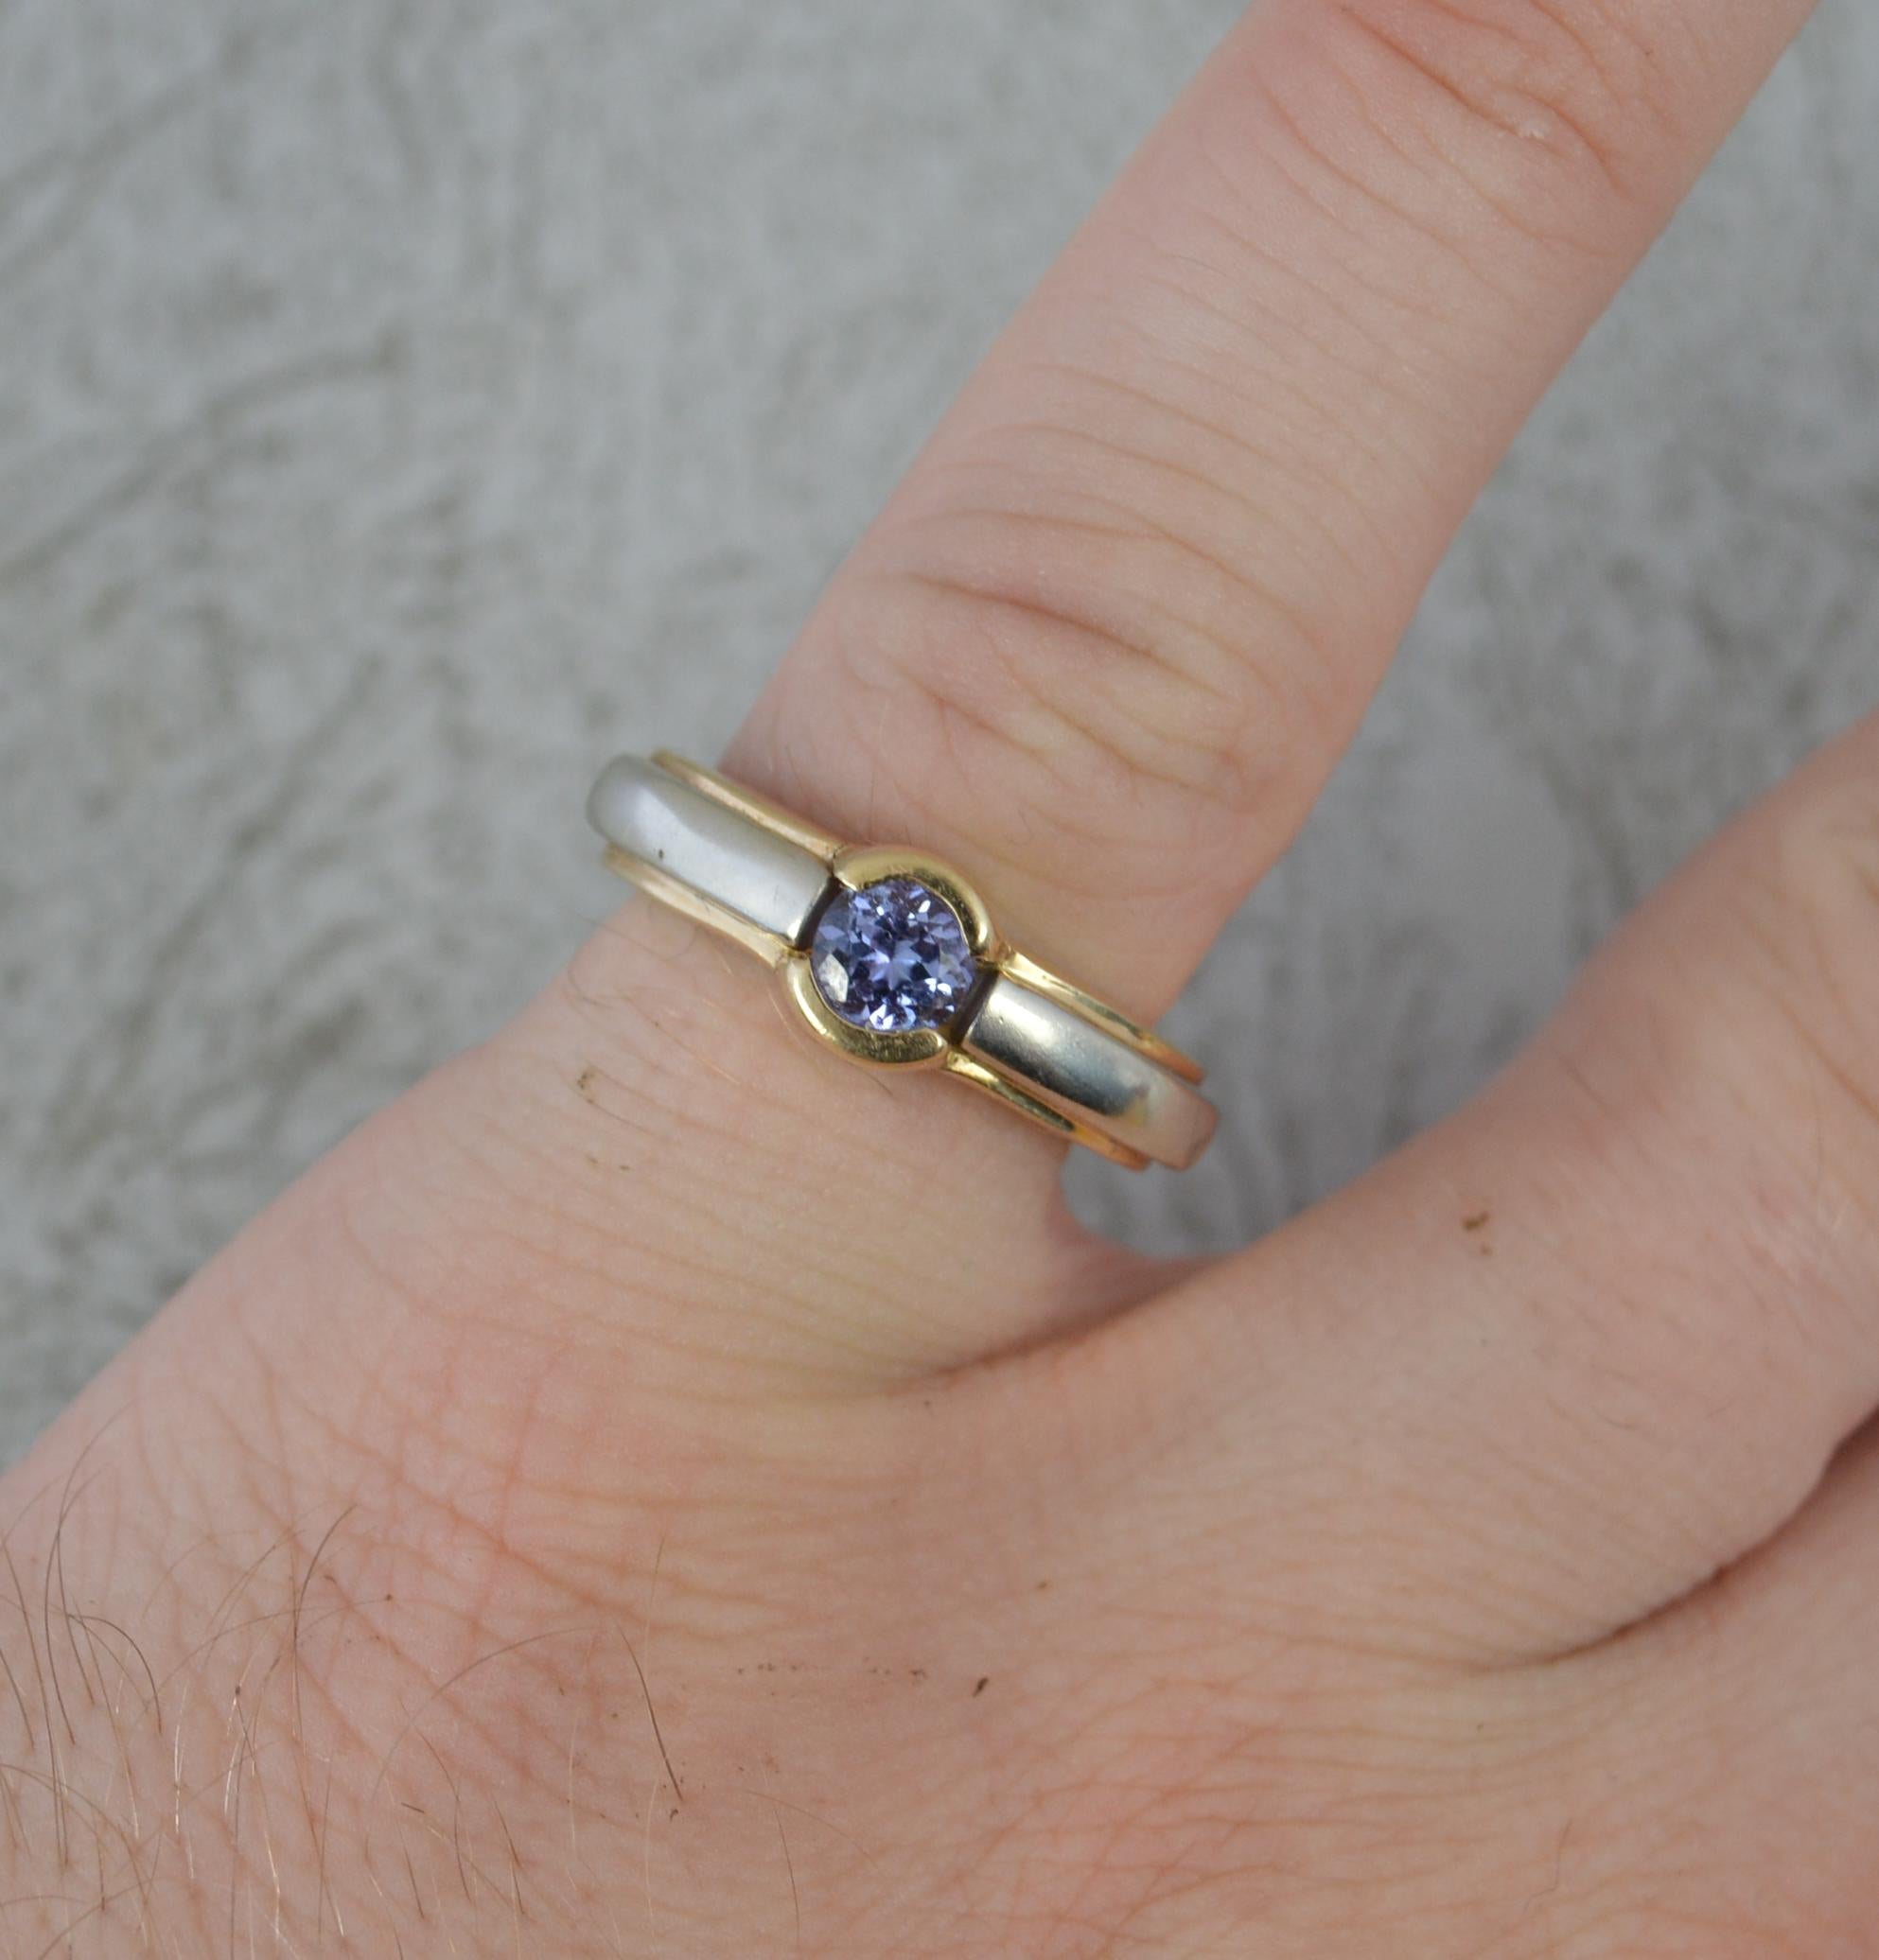 A beautiful tanzanite solitaire ring by Le Vian.
Solid 14 carat yellow gold band with white gold shoulders.
5mm diameter round cut natural tanzanite to centre.
With Le Vian box.

CONDITION ; Very good. Clean and solid band. Well set stone. Light